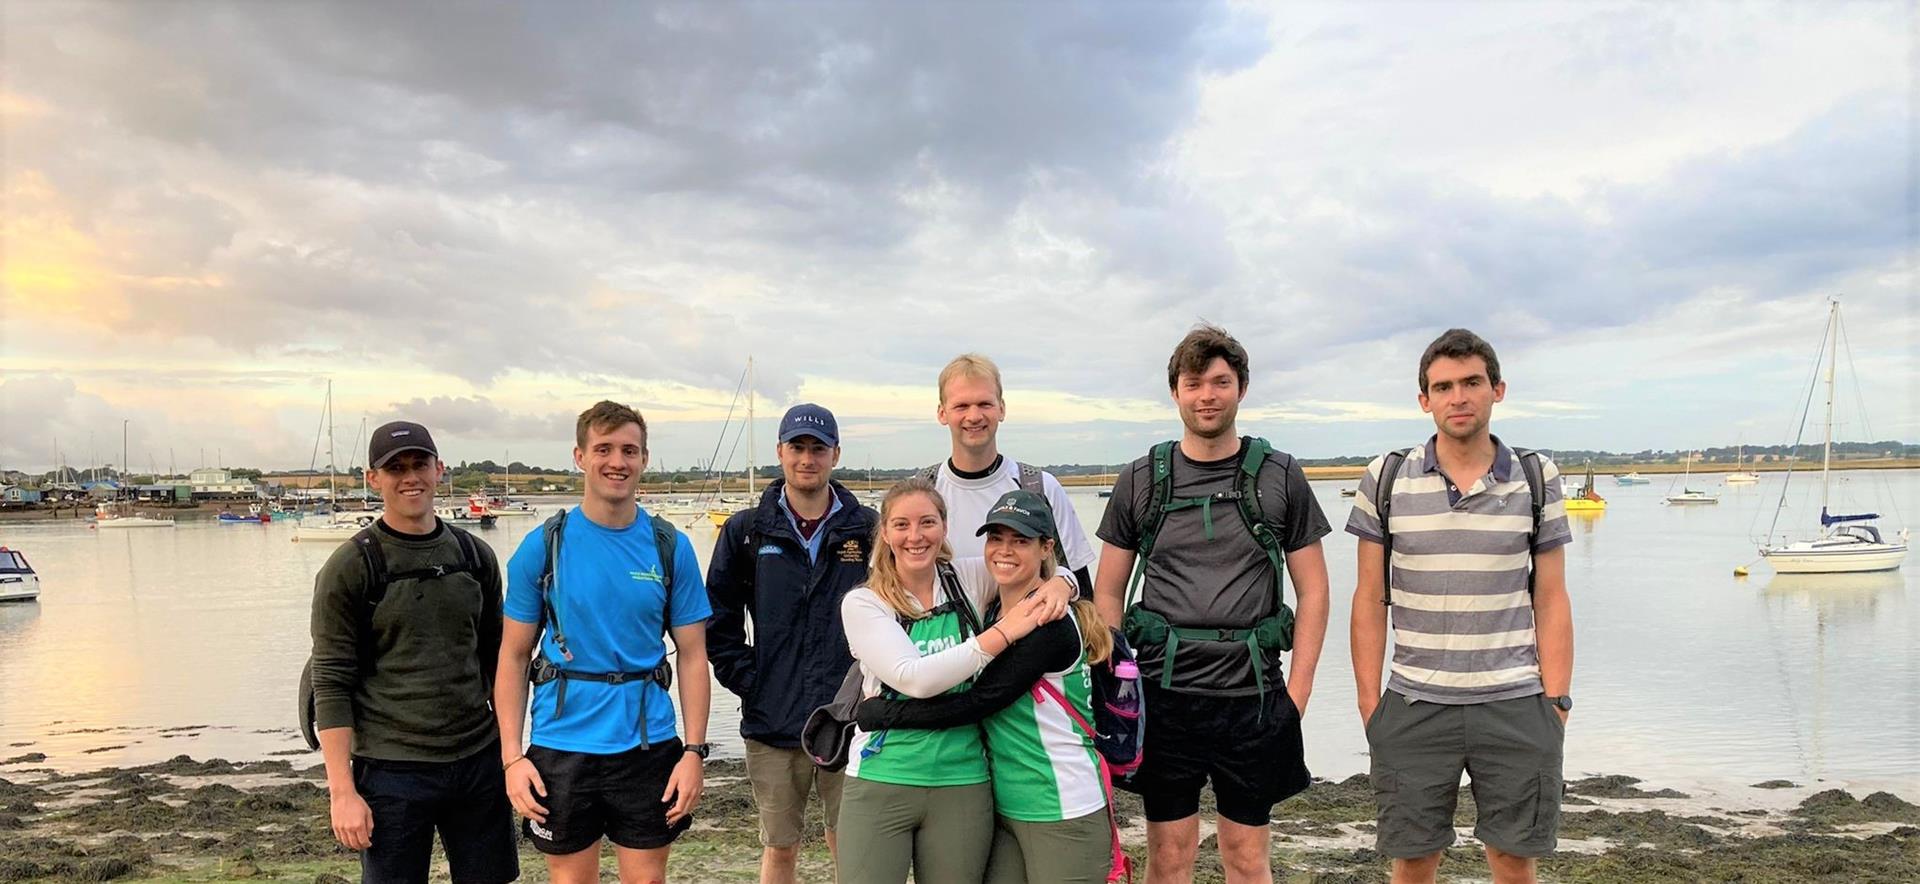 Team complete 60 mile walk for charity